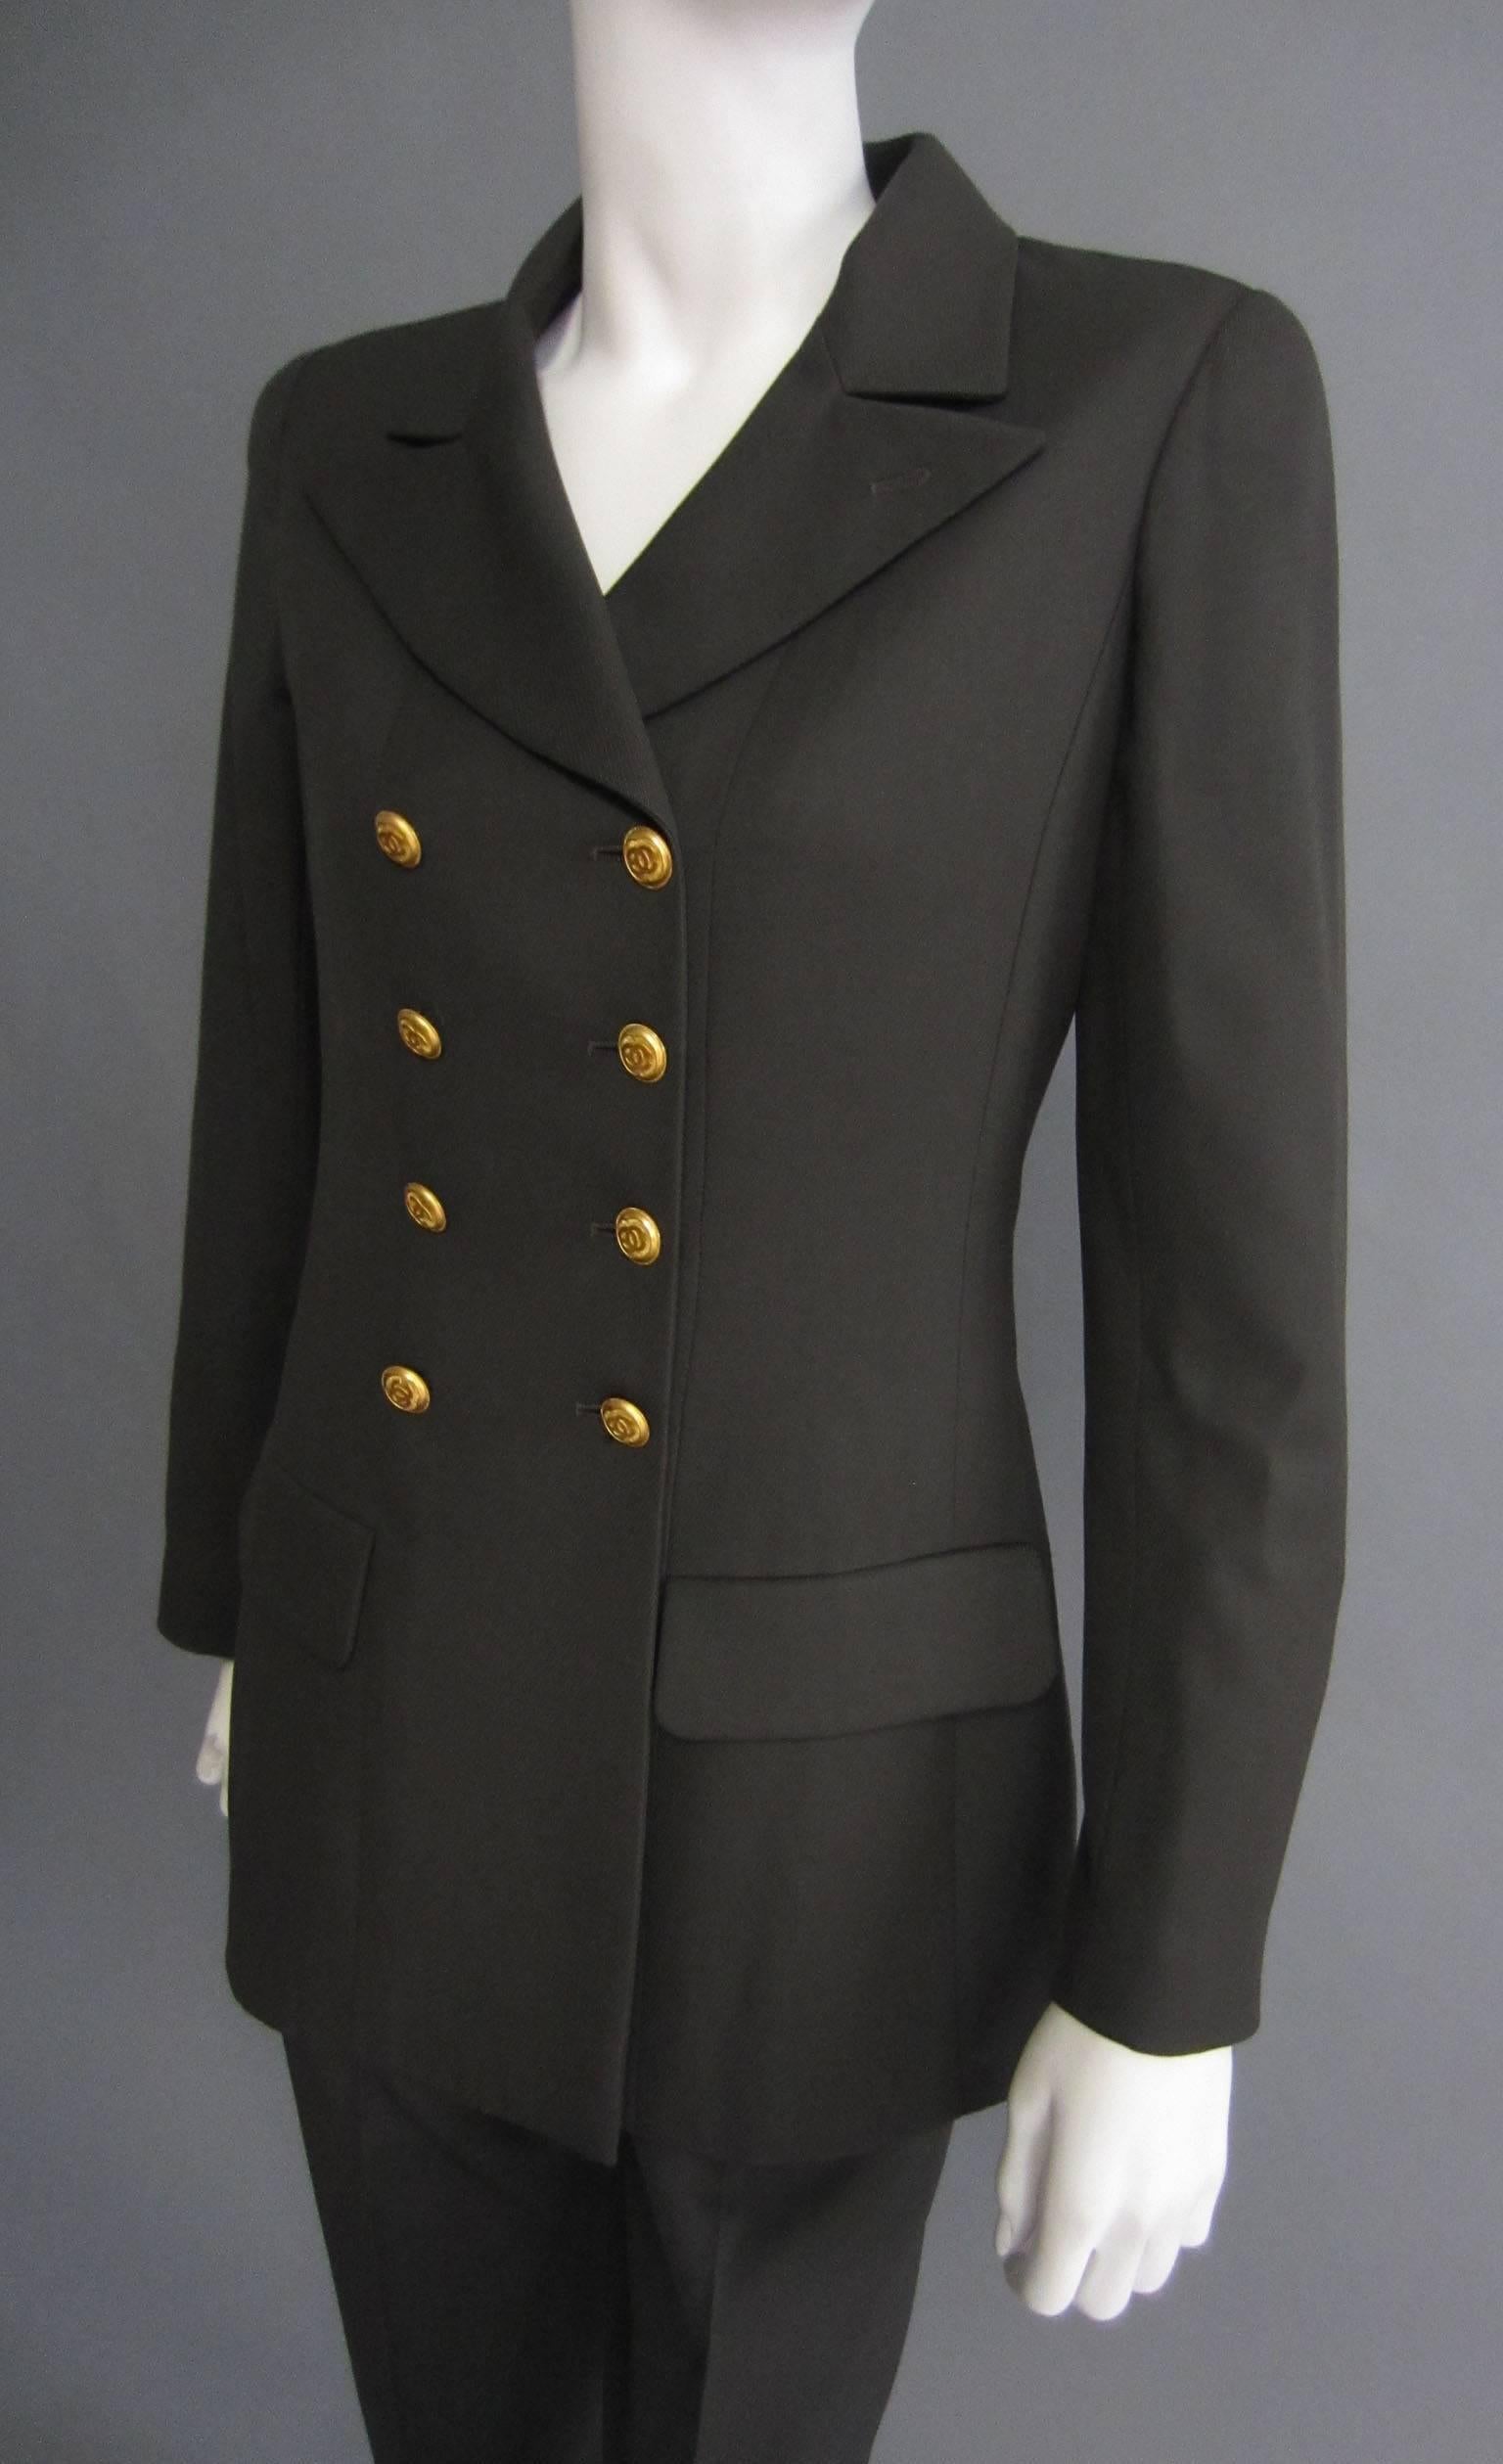 Black 1996 CHANEL Dark Green Pant Suit with Gold Button Detail For Sale